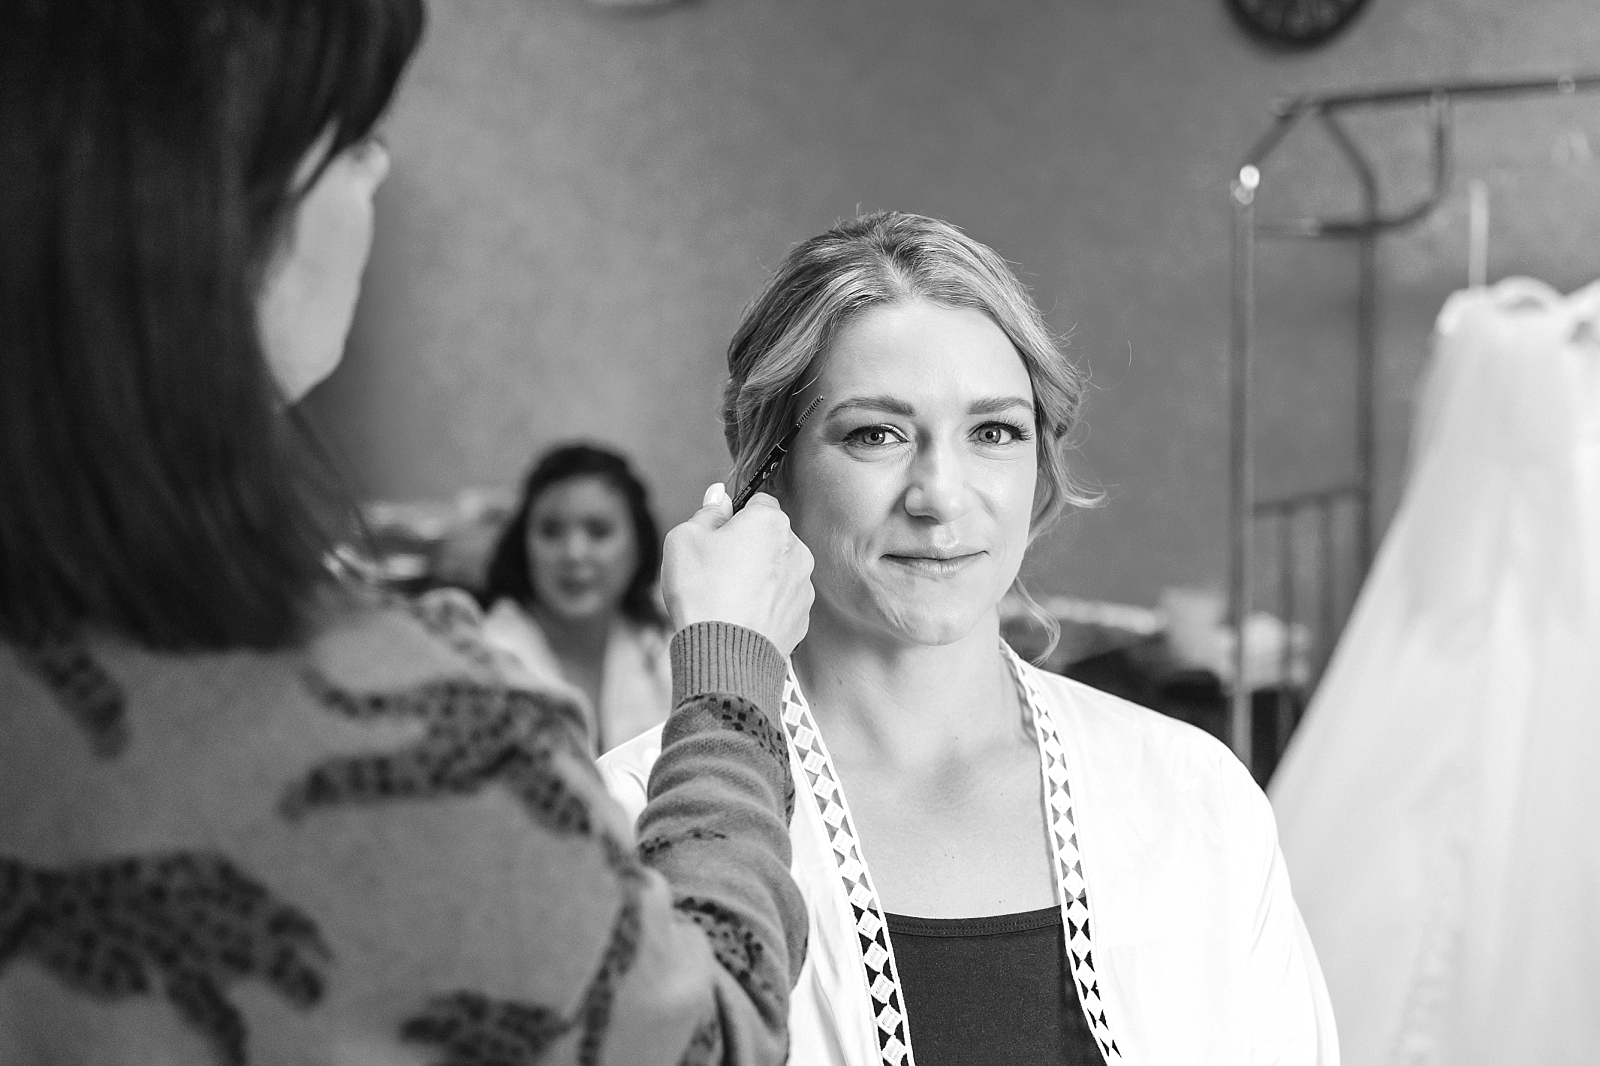 bride getting makeup done on wedding day